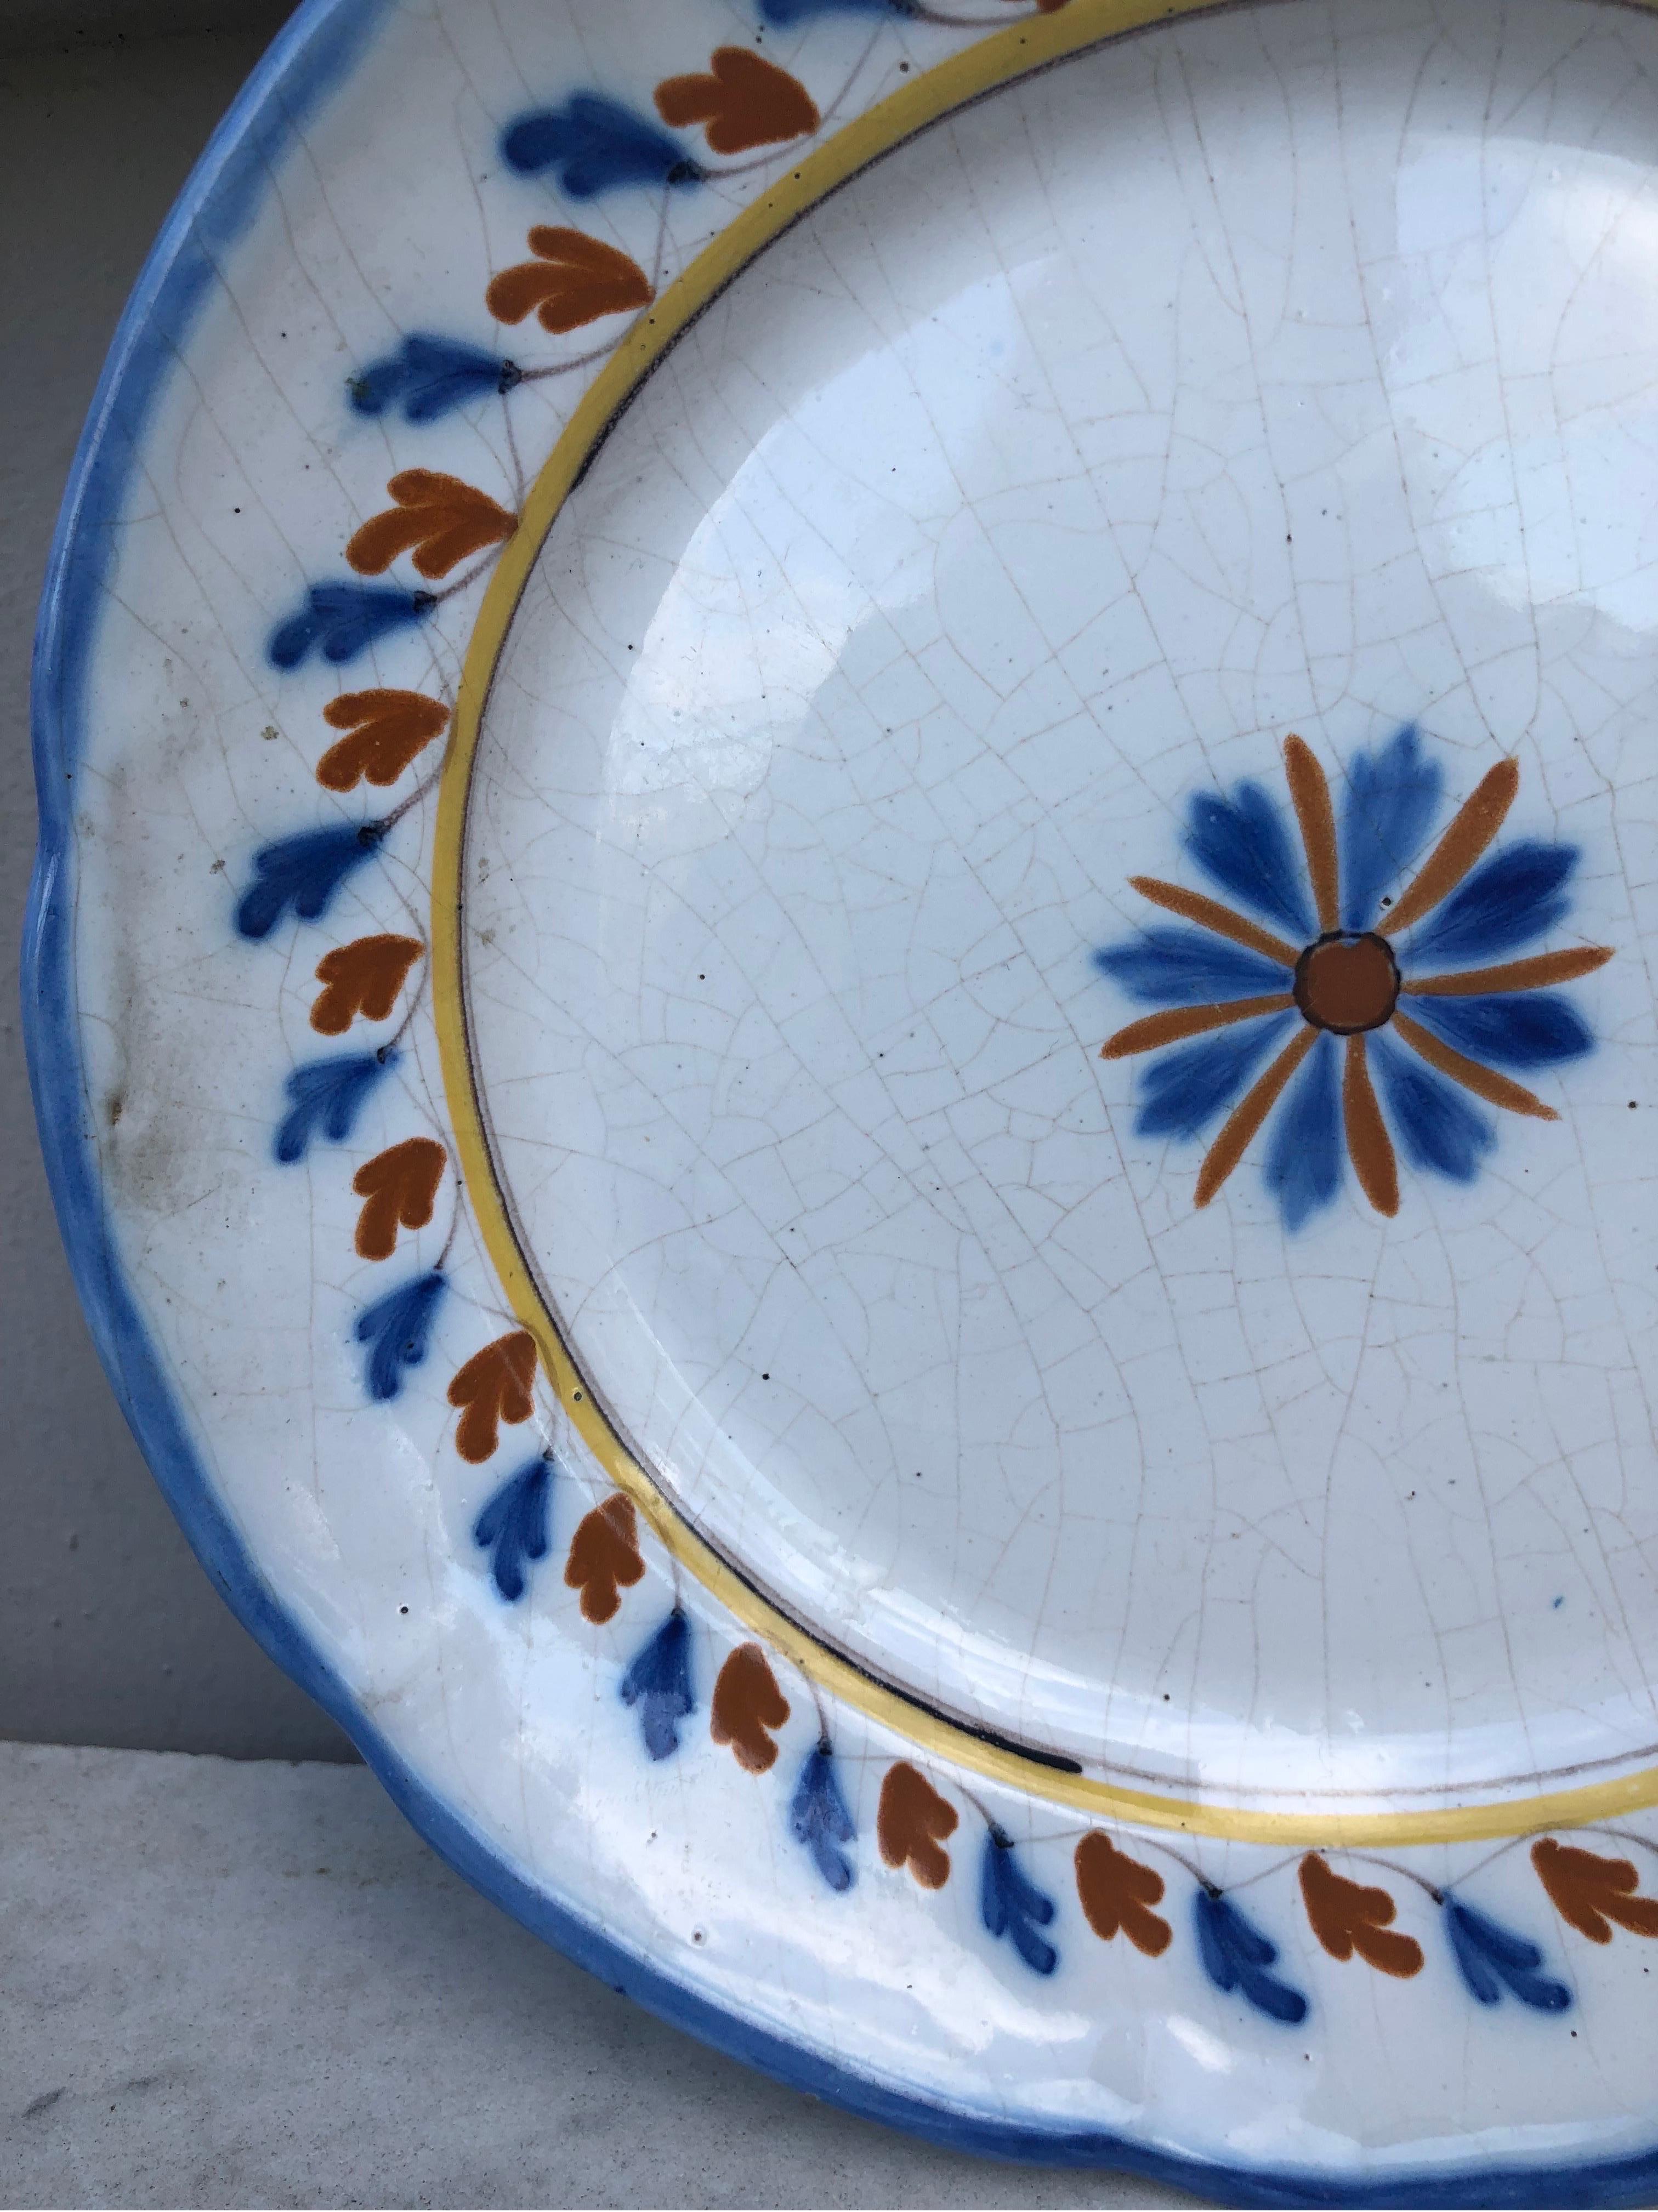 French Rustic Faience Plate Circa 1890.
Geometric pattern.